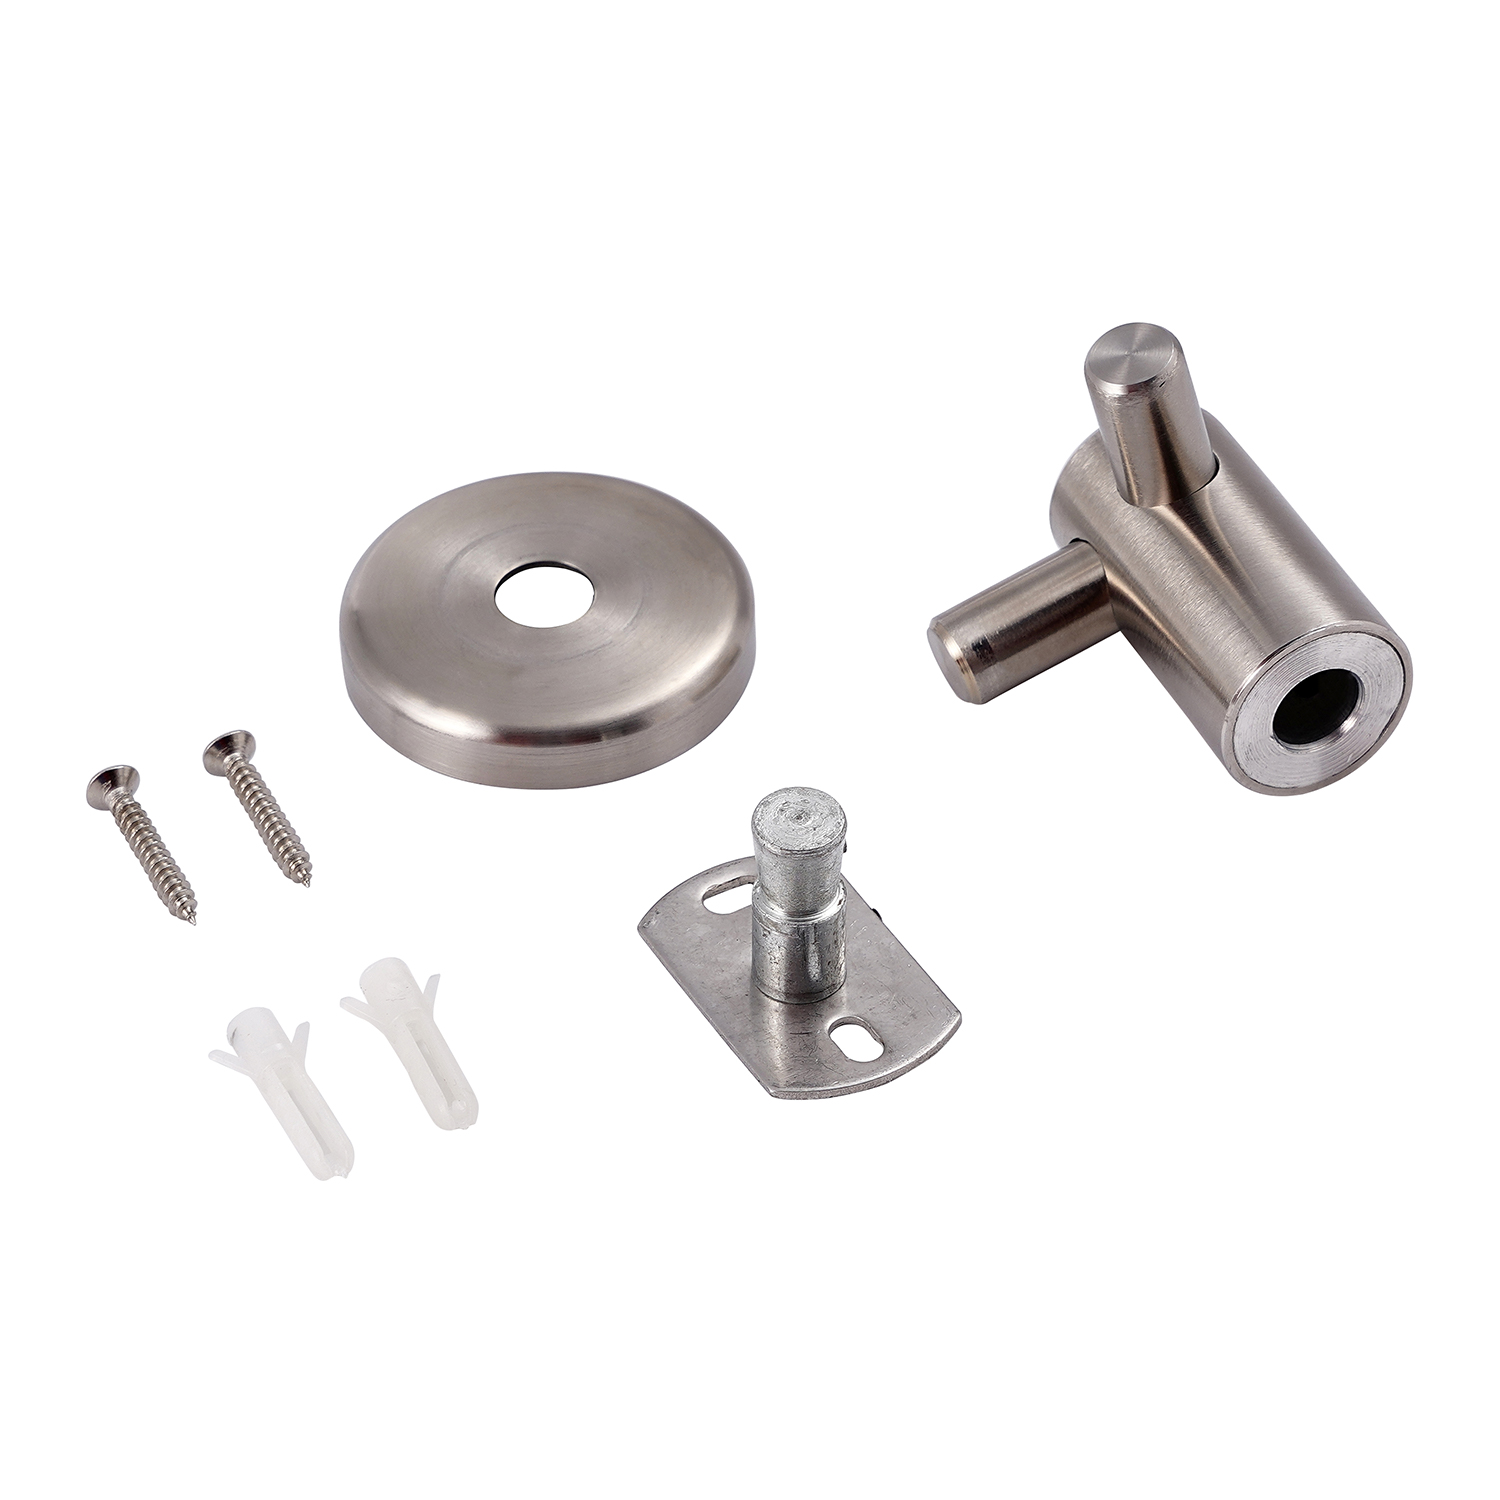 Stainless Steel Wall mounted Robe Hook